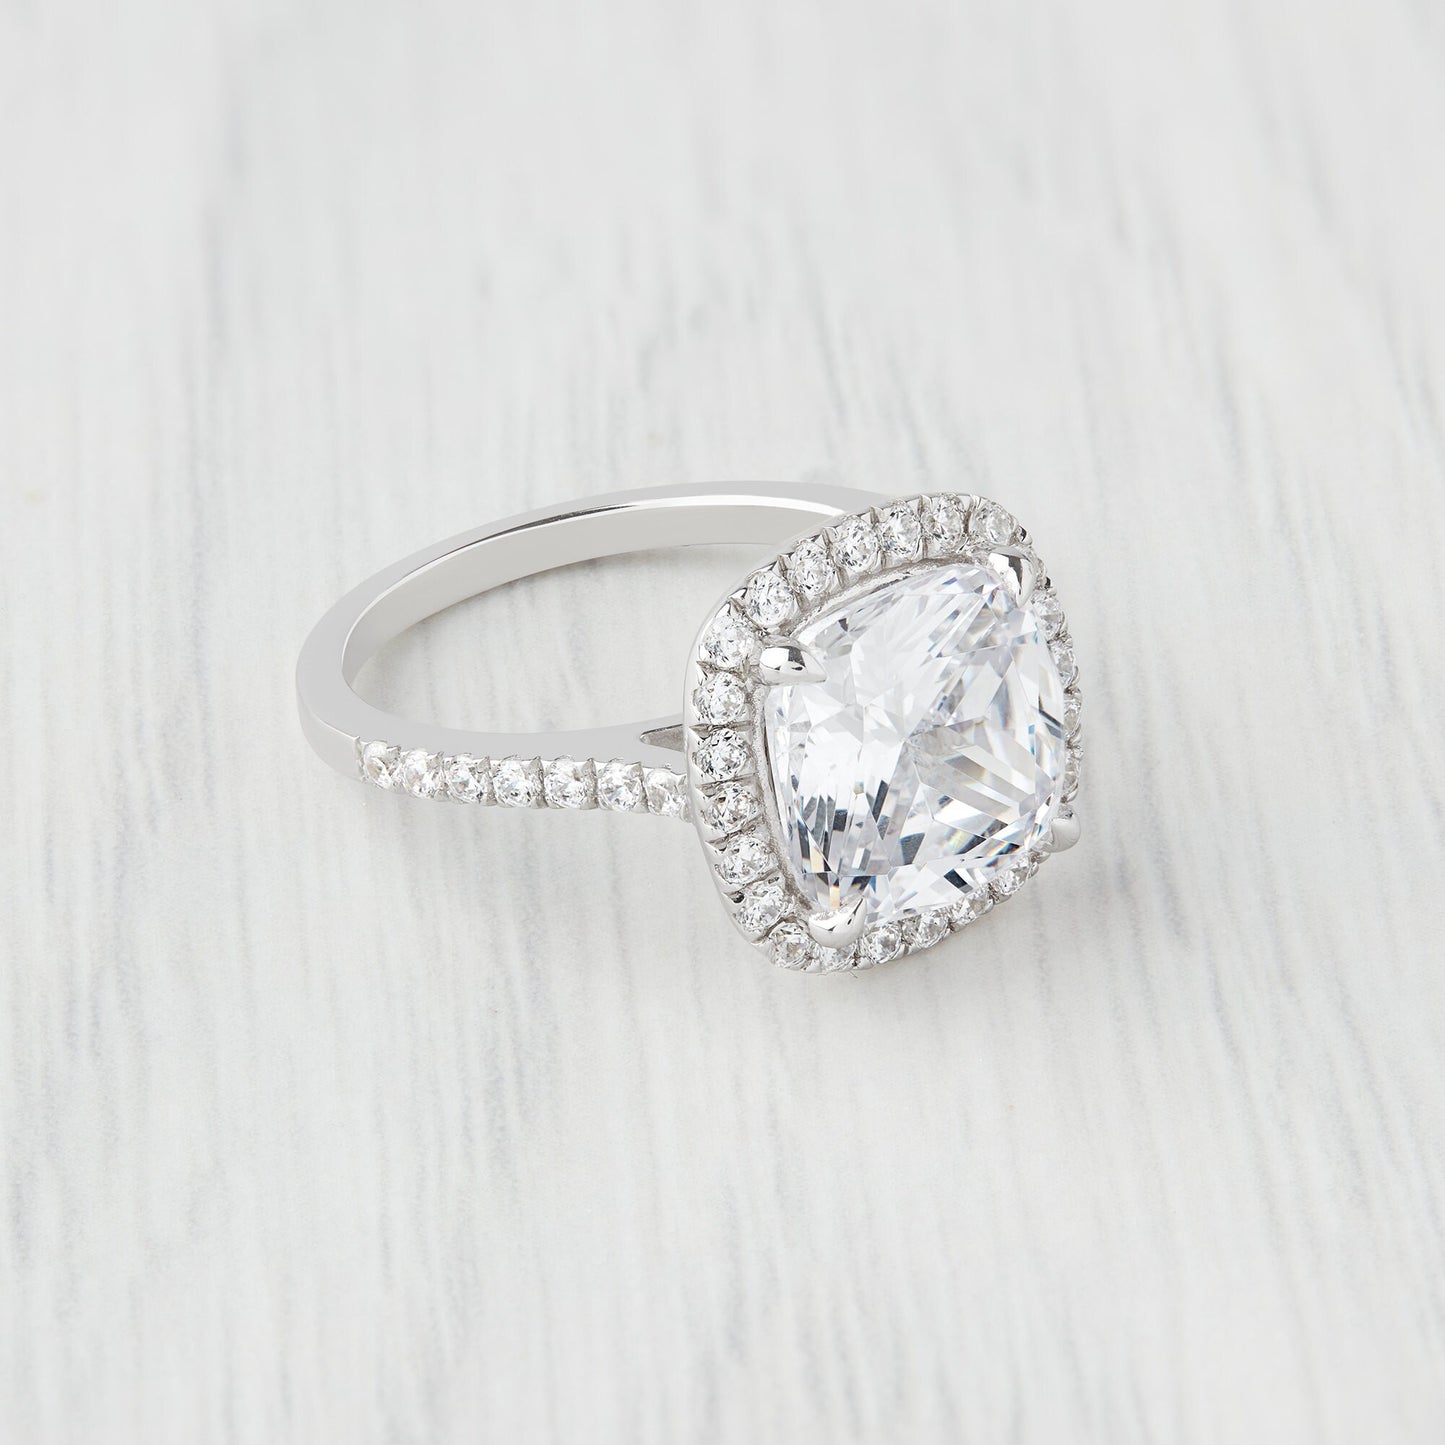 5.7ct Cushion cut Genuine Moissanite halo Engagement Ring - Available in gold, rose gold and white gold - Handmade